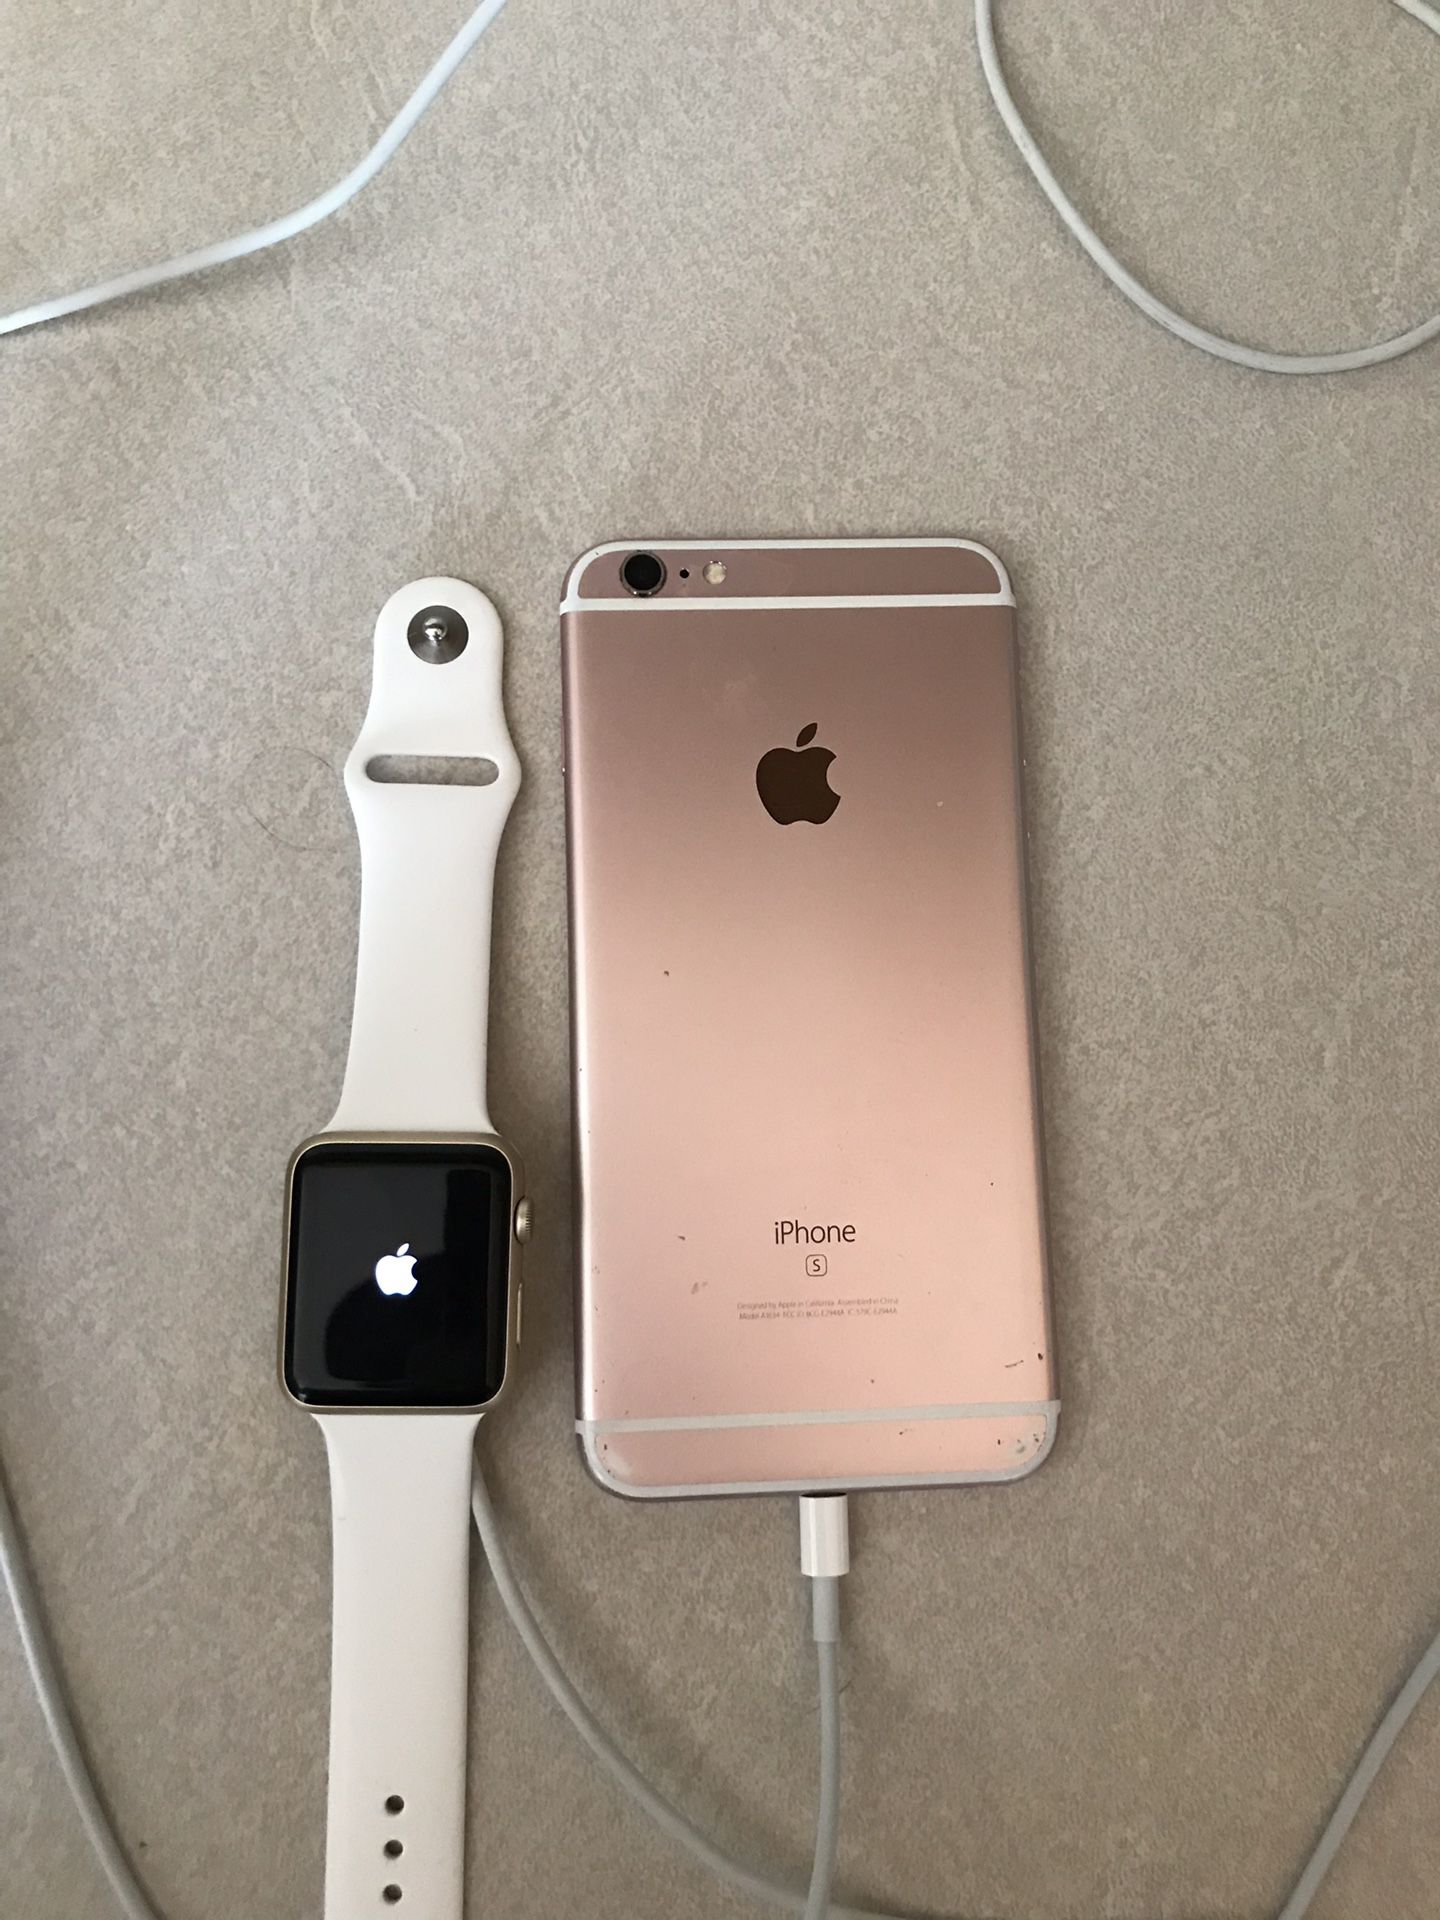 iPhone 6s Plus rose gold and an Apple Watch series 1